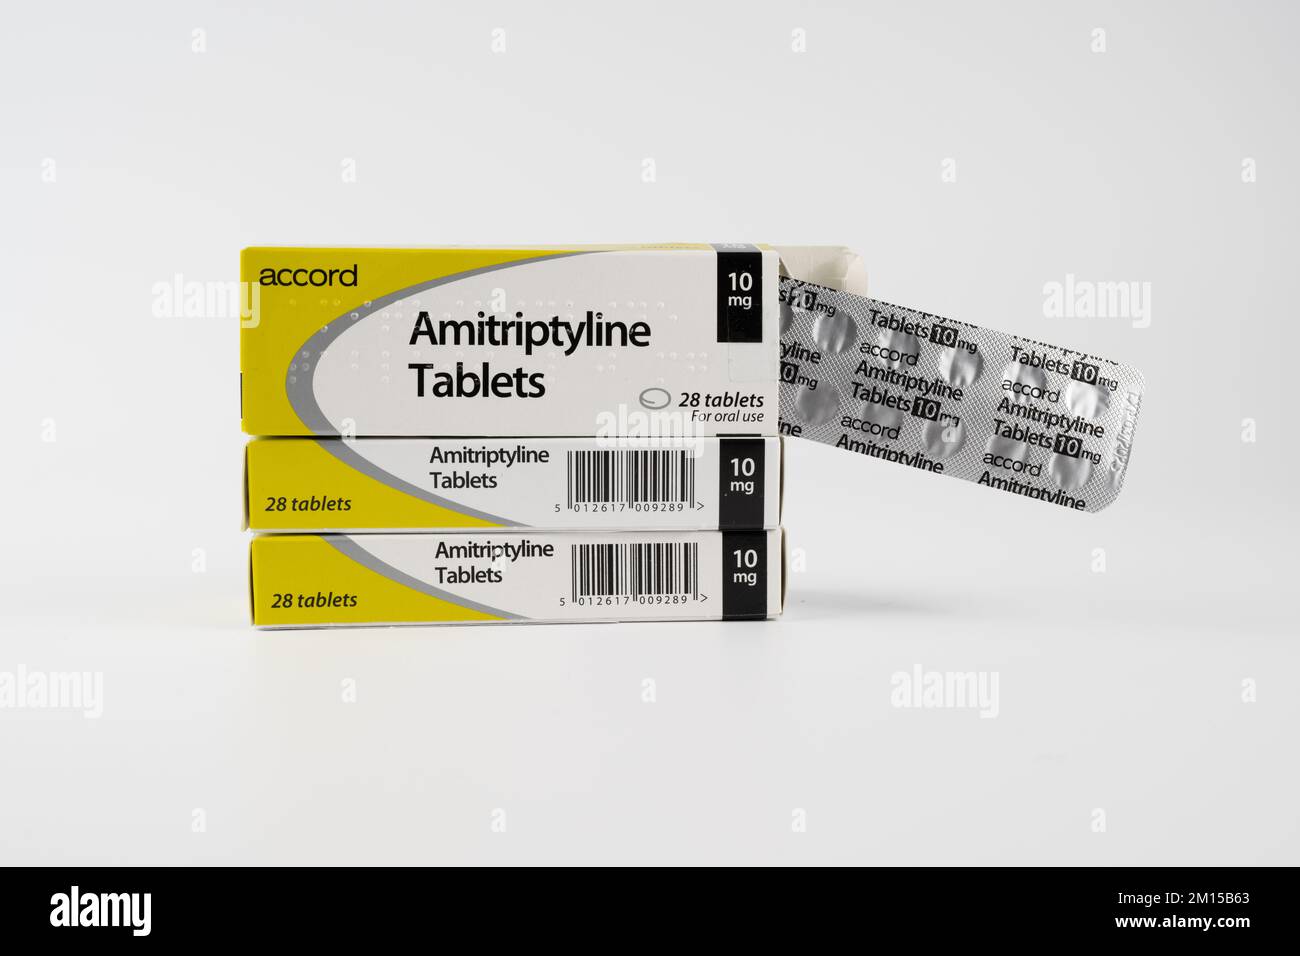 Cardiff Mid Glamorgan Wales UK December 10 2022  boxes of Amitriptyline Tablets for oral use isolated against a white background Stock Photo